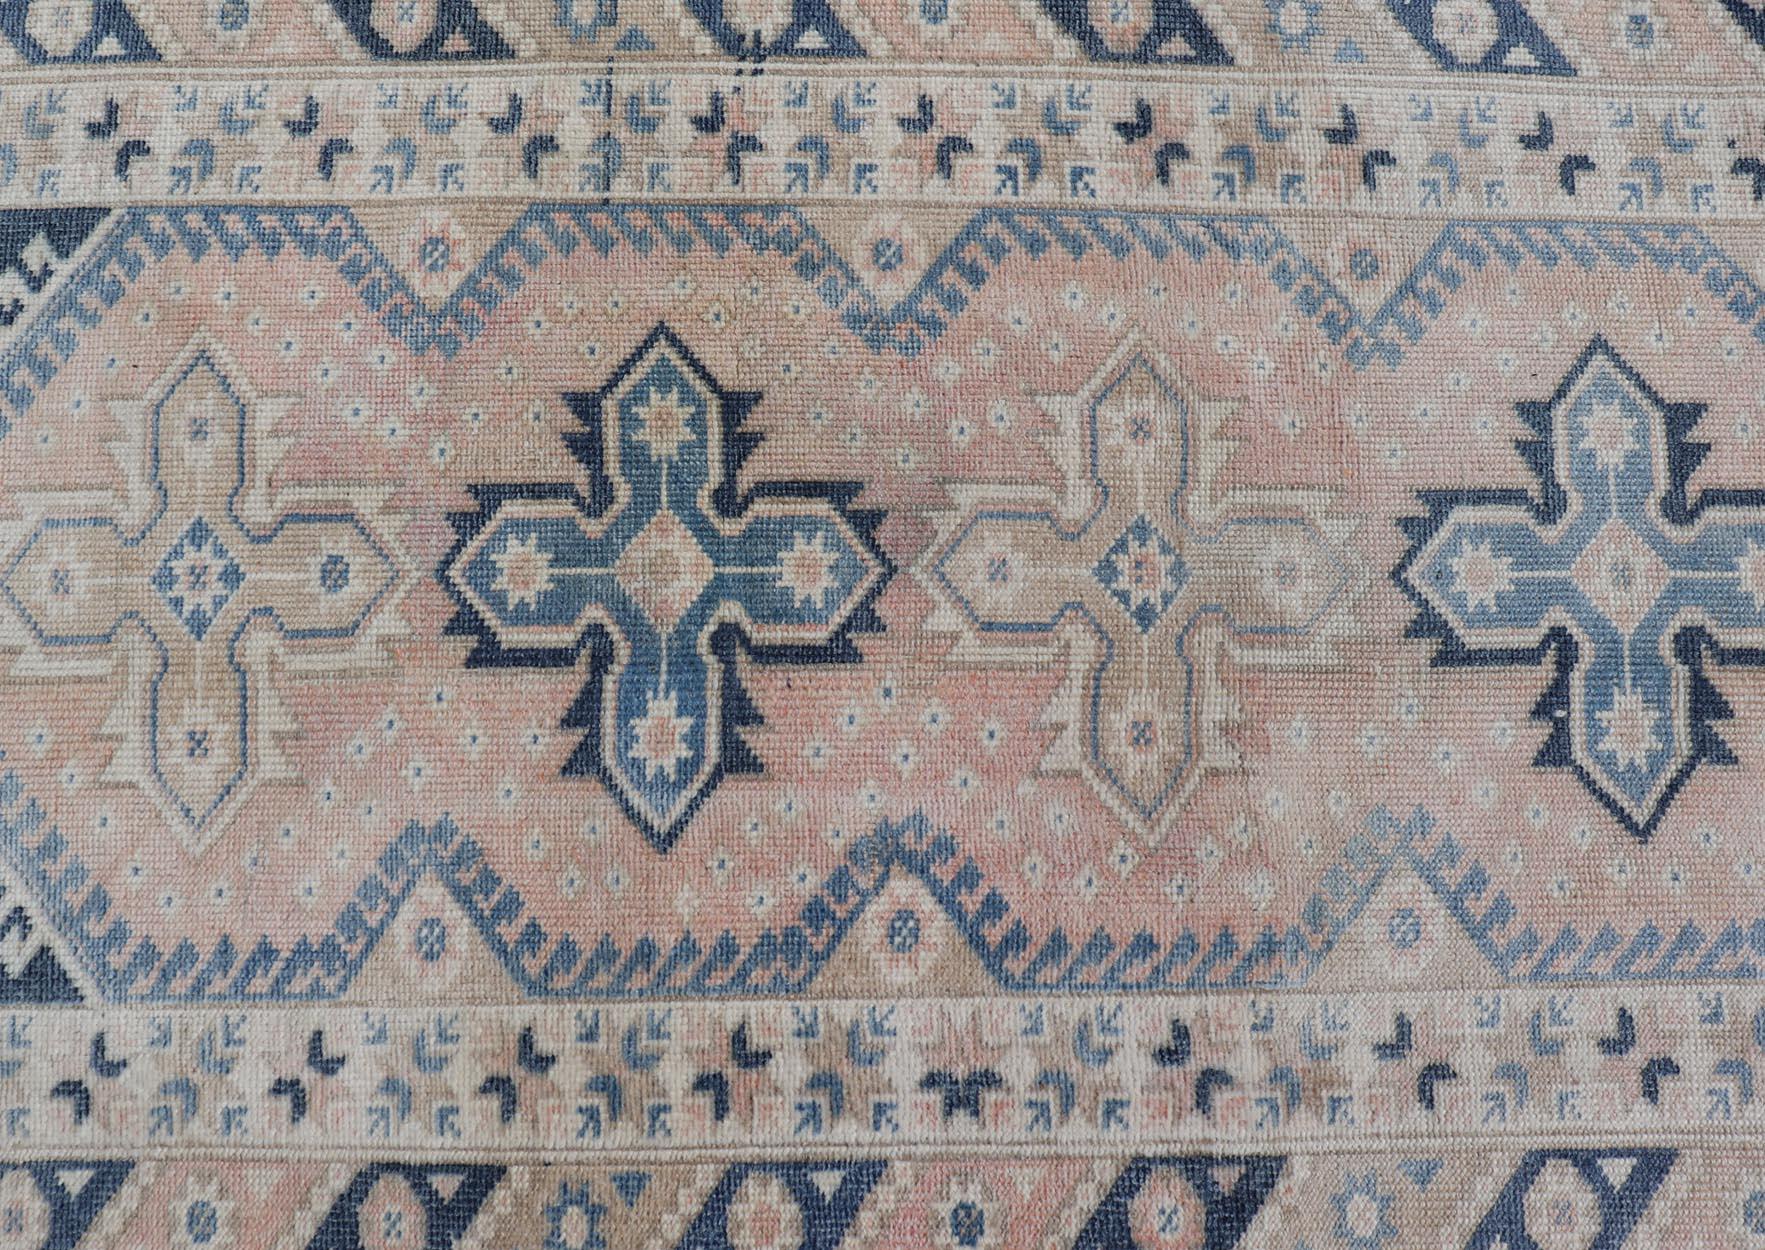 Tribal Design Vintage Turkish Oushak Runner with Blue's, Taupe and Cream. Rug EN-15349, country of origin / type: Turkey / Oushak, circa 1940.
Measures: 2'11 x 15'5 
This vintage Turkish Oushak runner features three lightly rendered, stylized